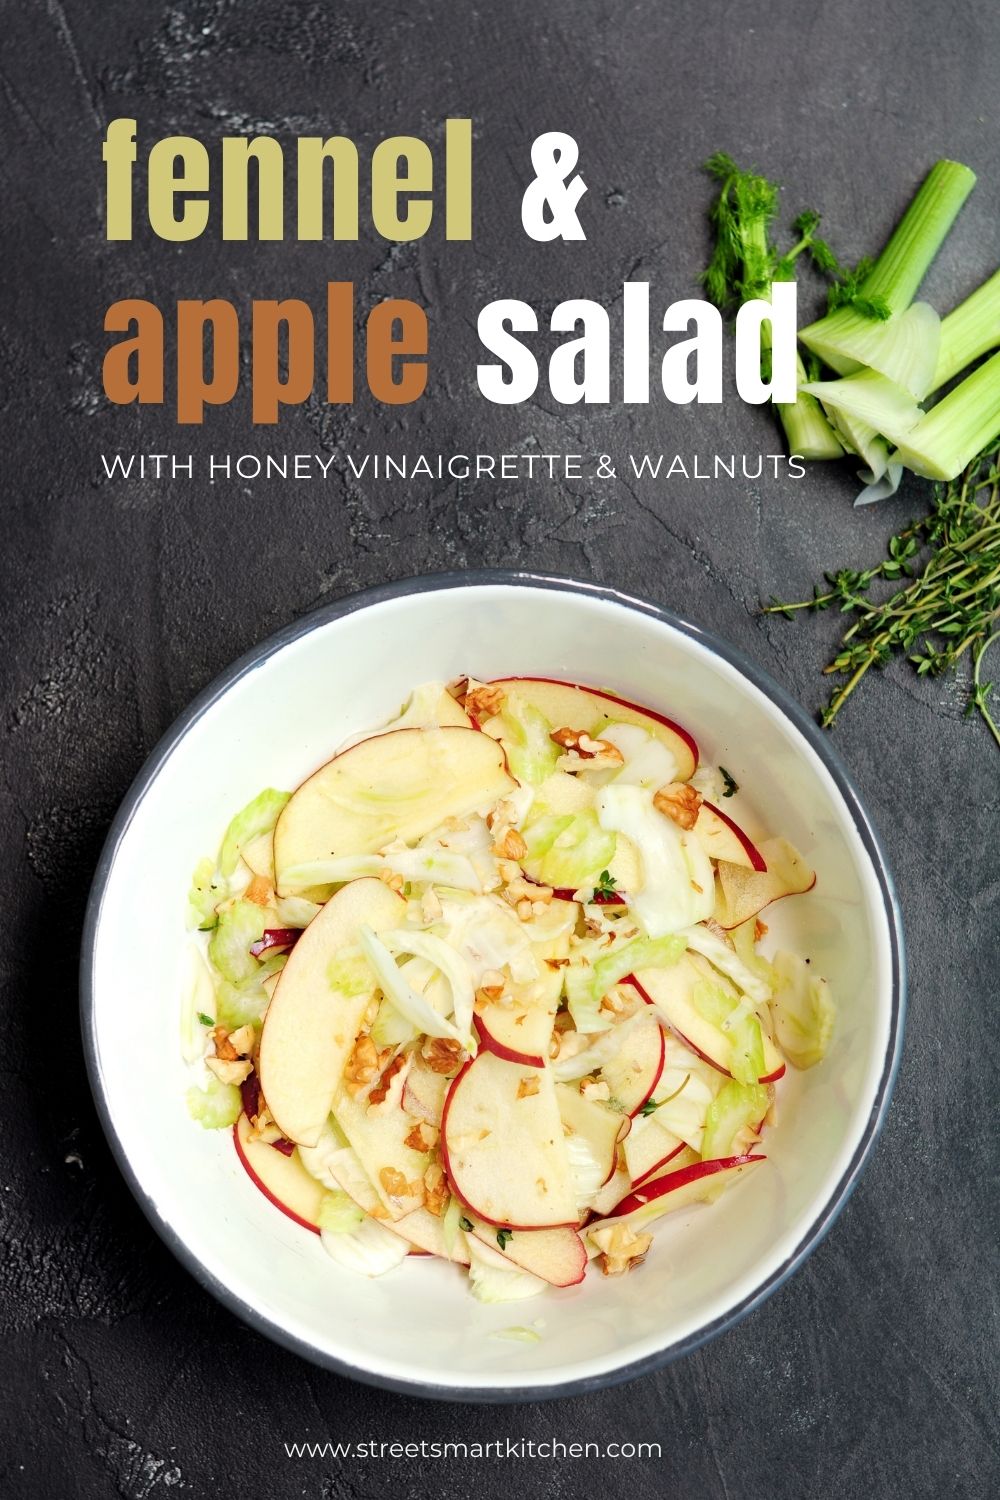 Crunchy Fennel Apple Salad with Honey Vinaigrette and Walnuts